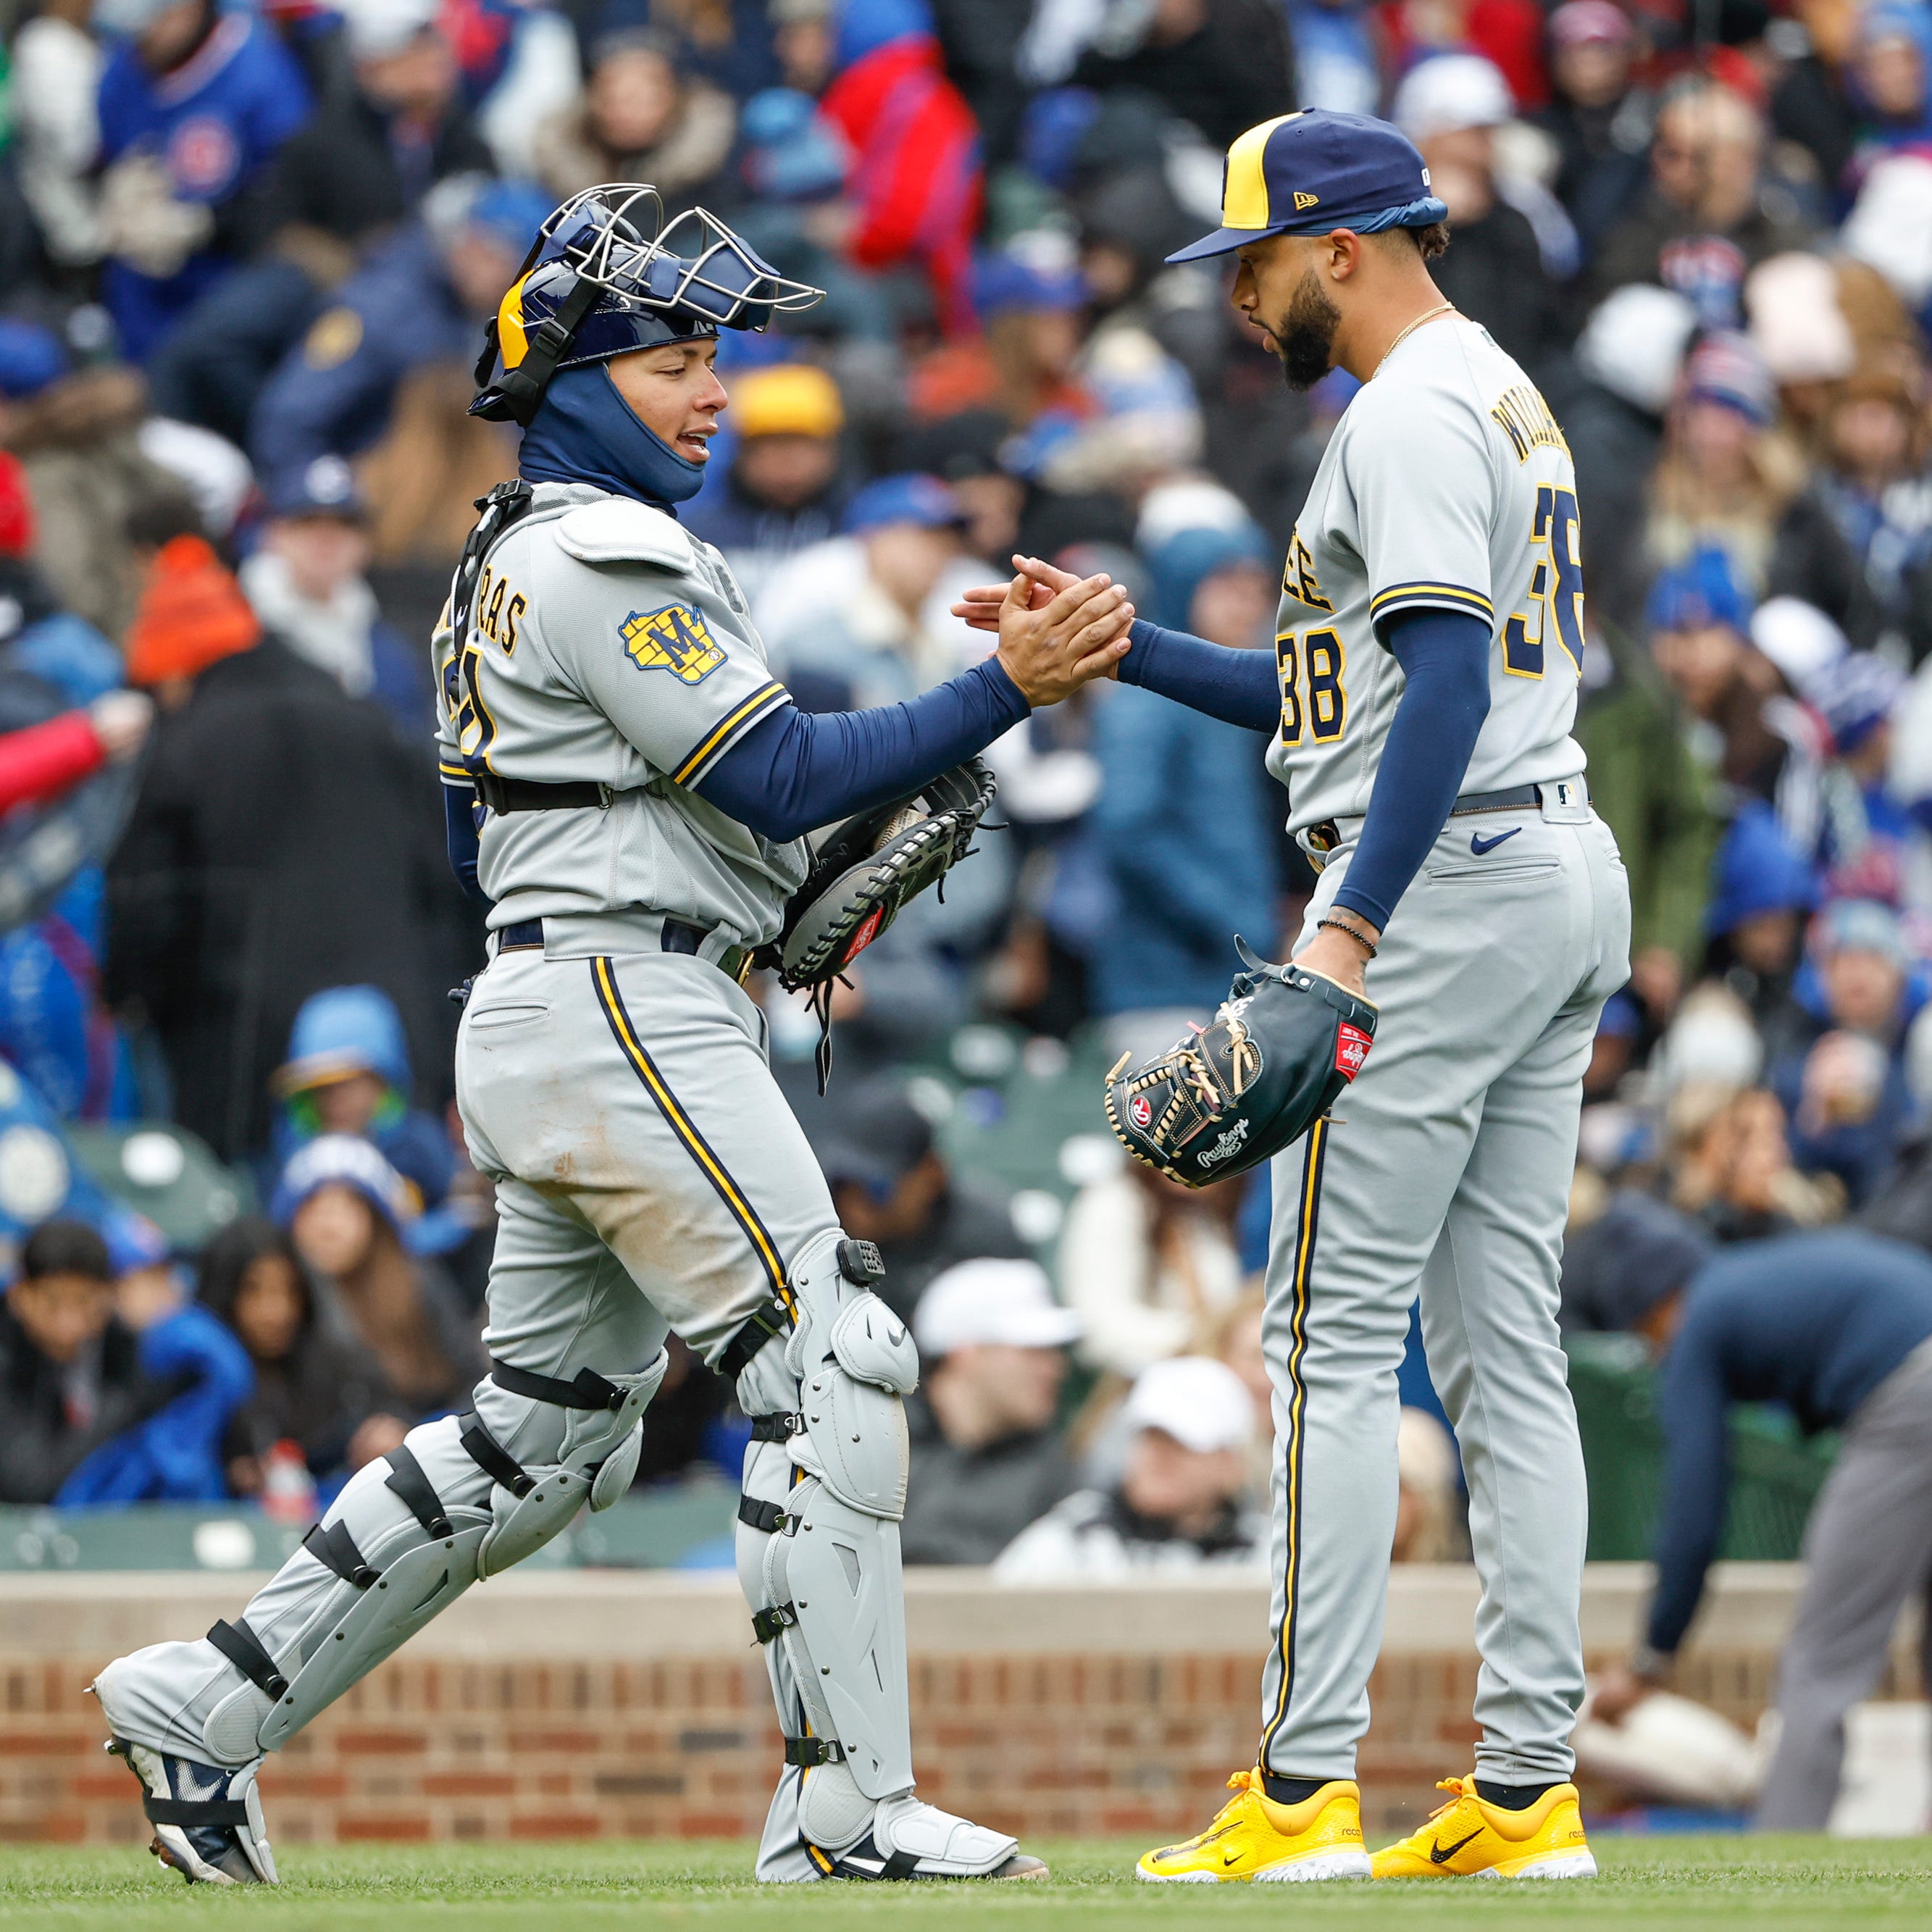 Brewers relief pitcher Devin Williams celebrates with catcher William Contreras after a win.